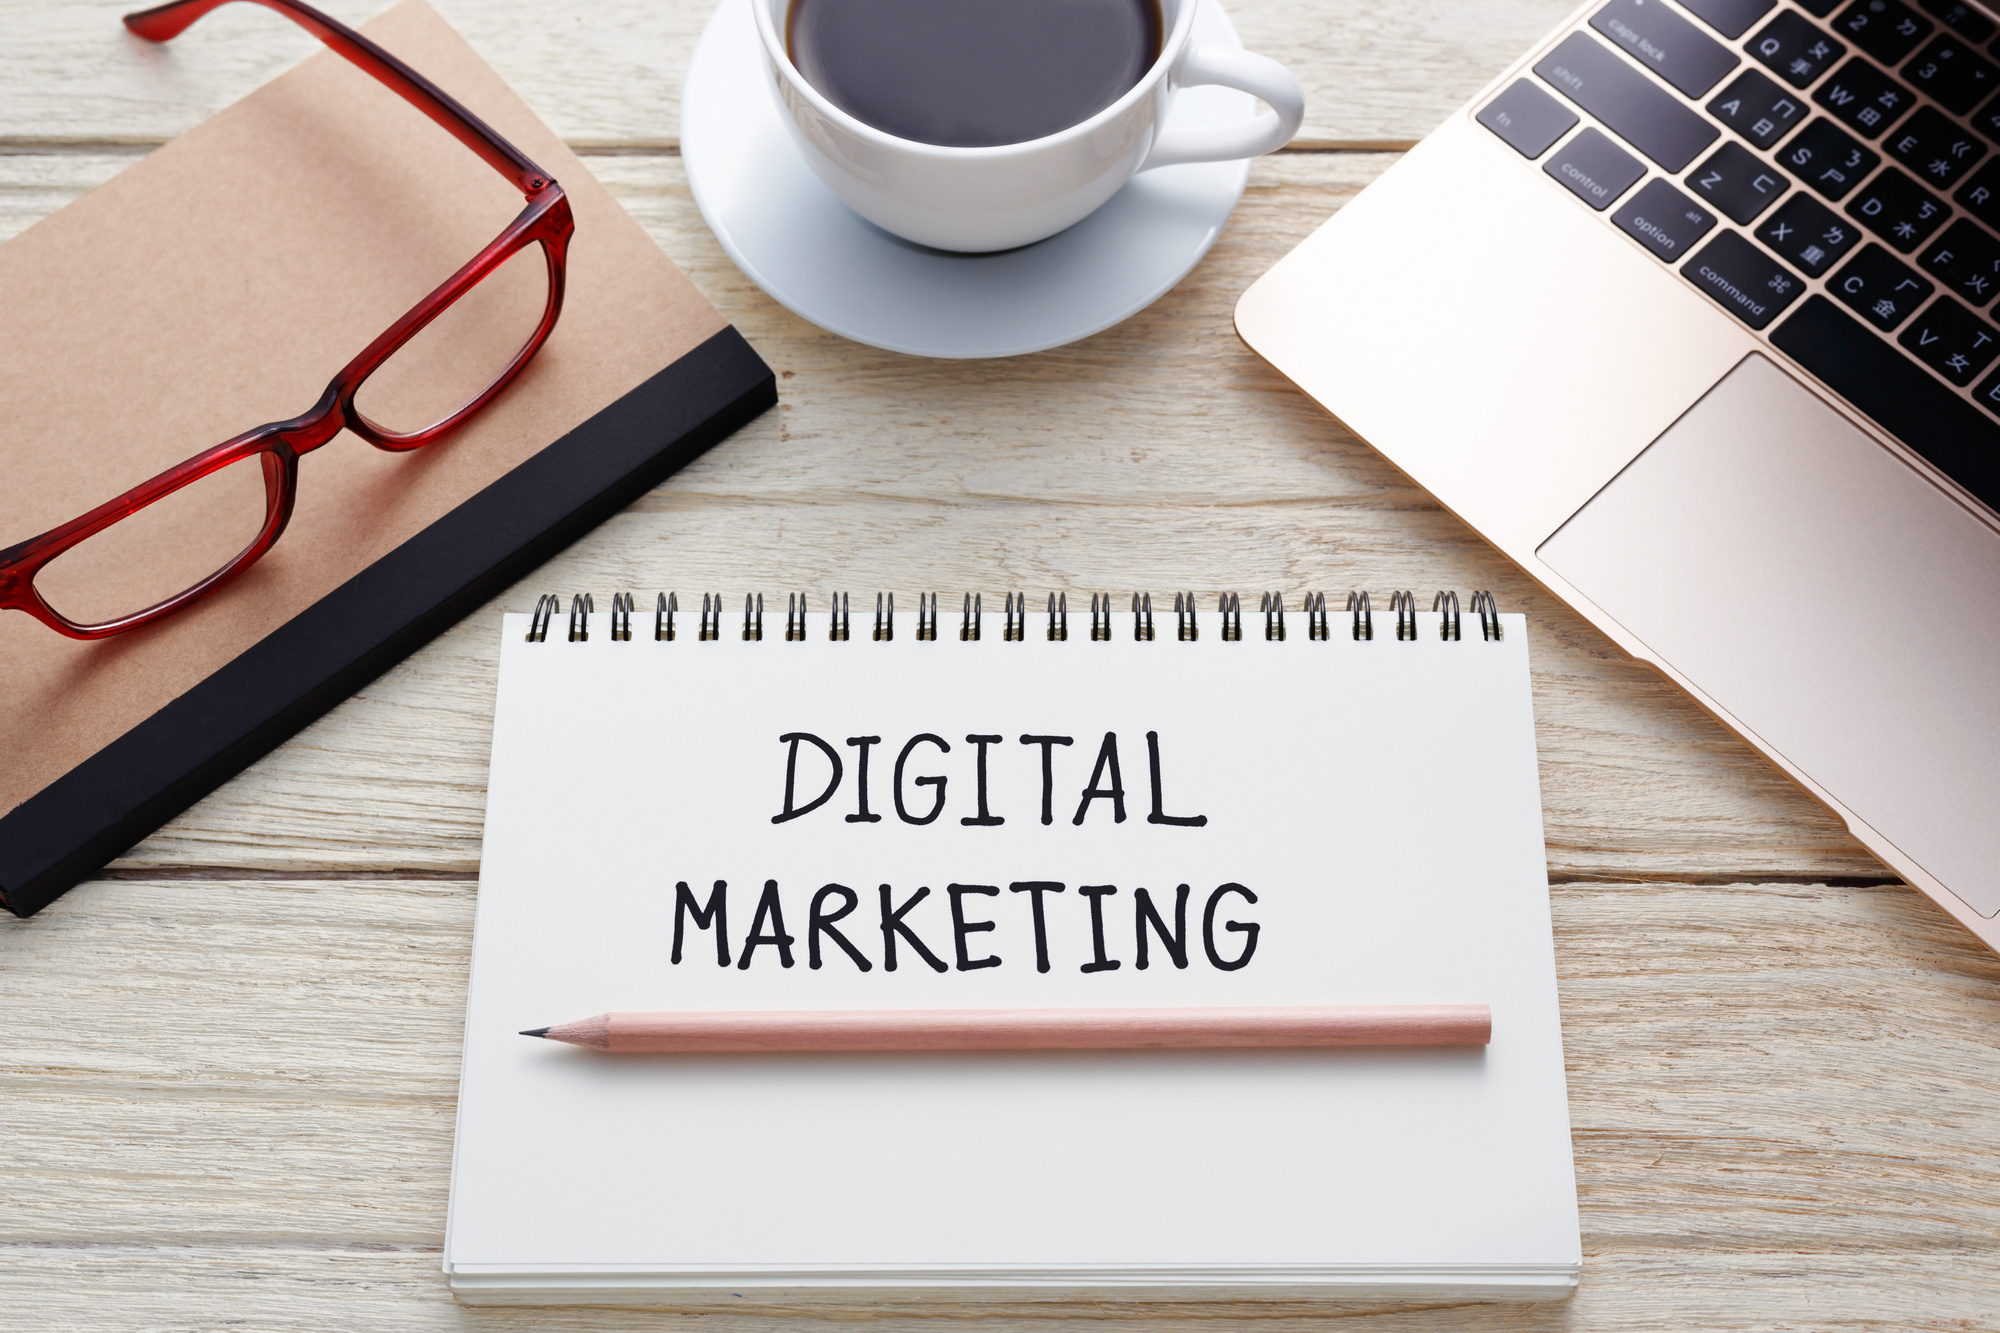 10 Must-Know Digital Marketing Tips for Small Businesses